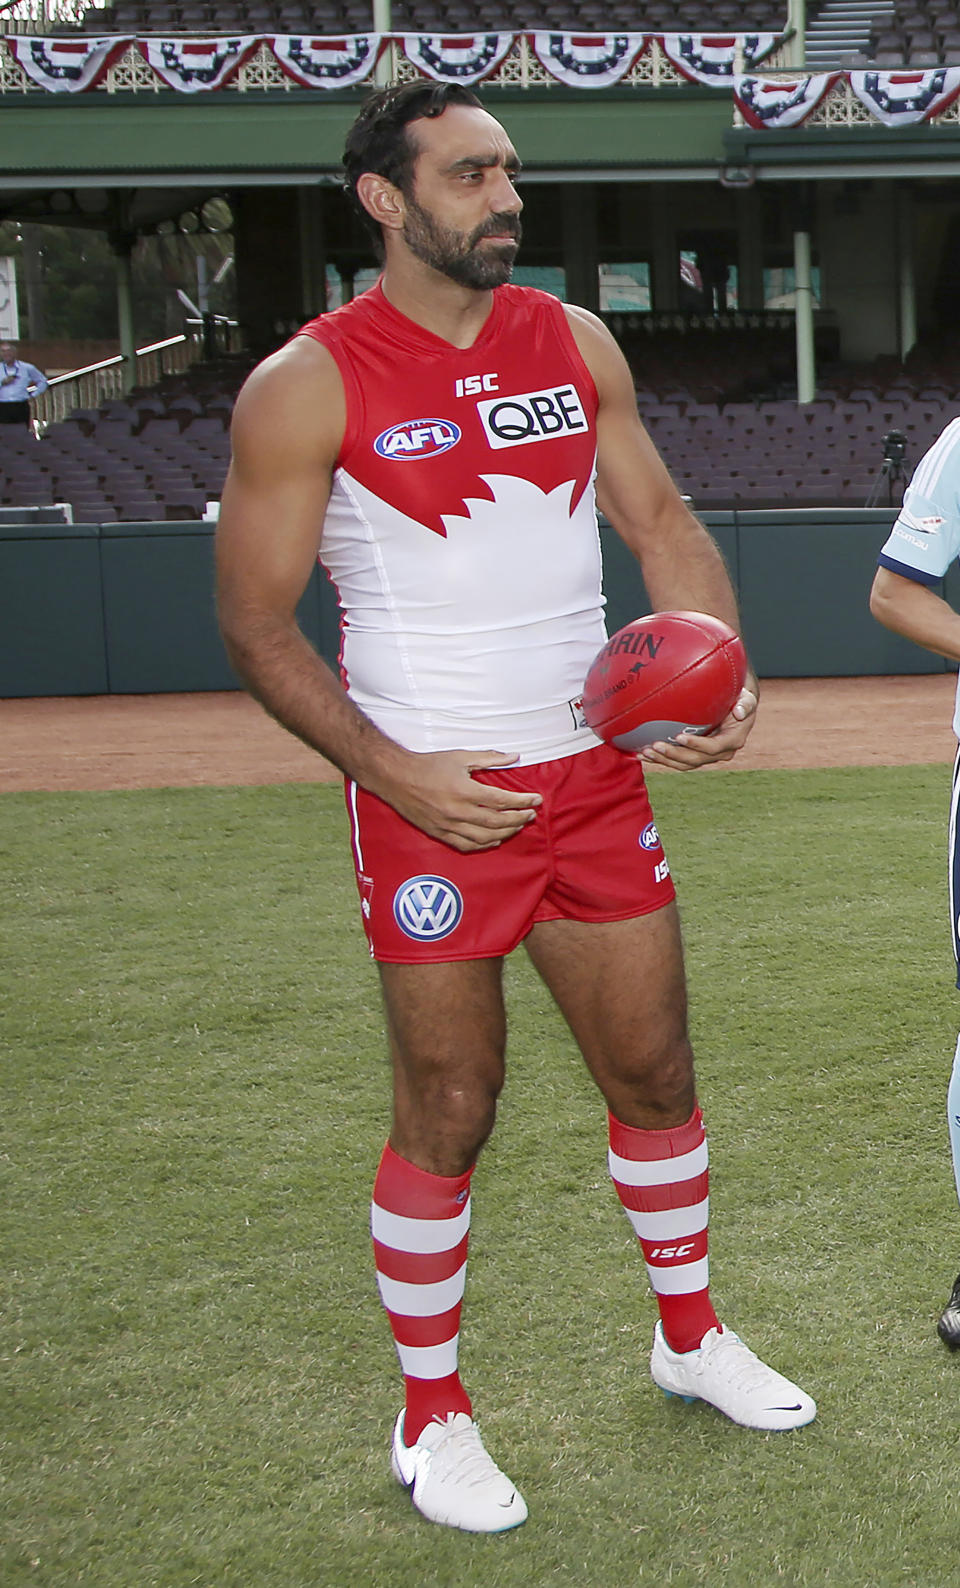 FILE - In this March 19, 2014, file photo, Sydney Swans player Adam Goodes holds an Australian Rules Football at the Sydney Cricket Ground. Goodes has declined an offer to be inducted into the Melbourne-based AFL's Hall of Fame. (AP Photo/Rick Rycroft, File)